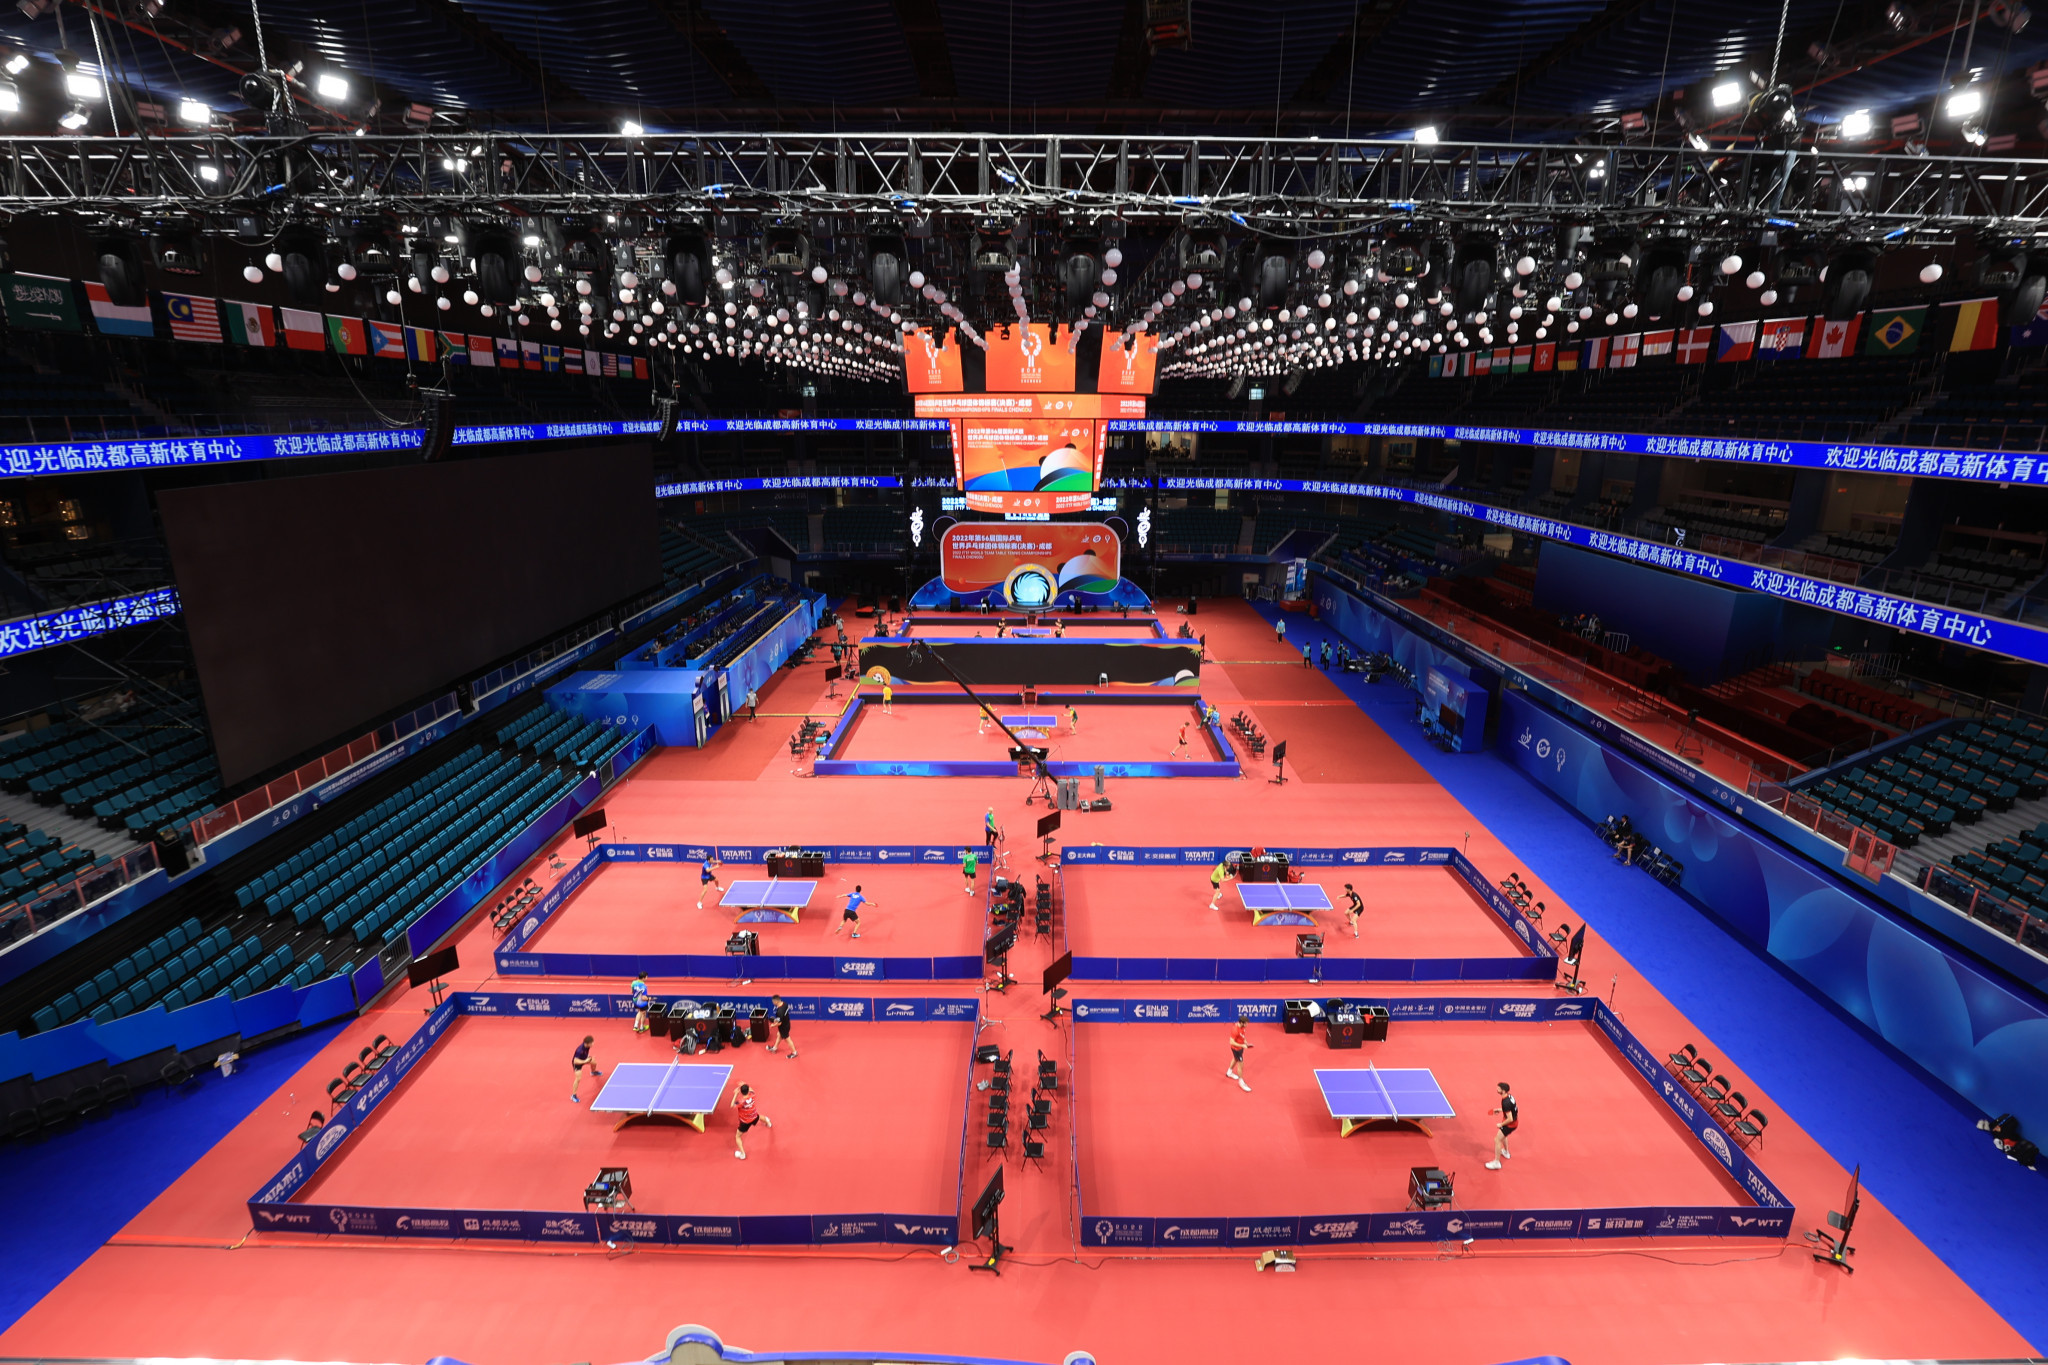 More than 1,000 invited spectators are expected to attend each match at the World Championships ©ITTF